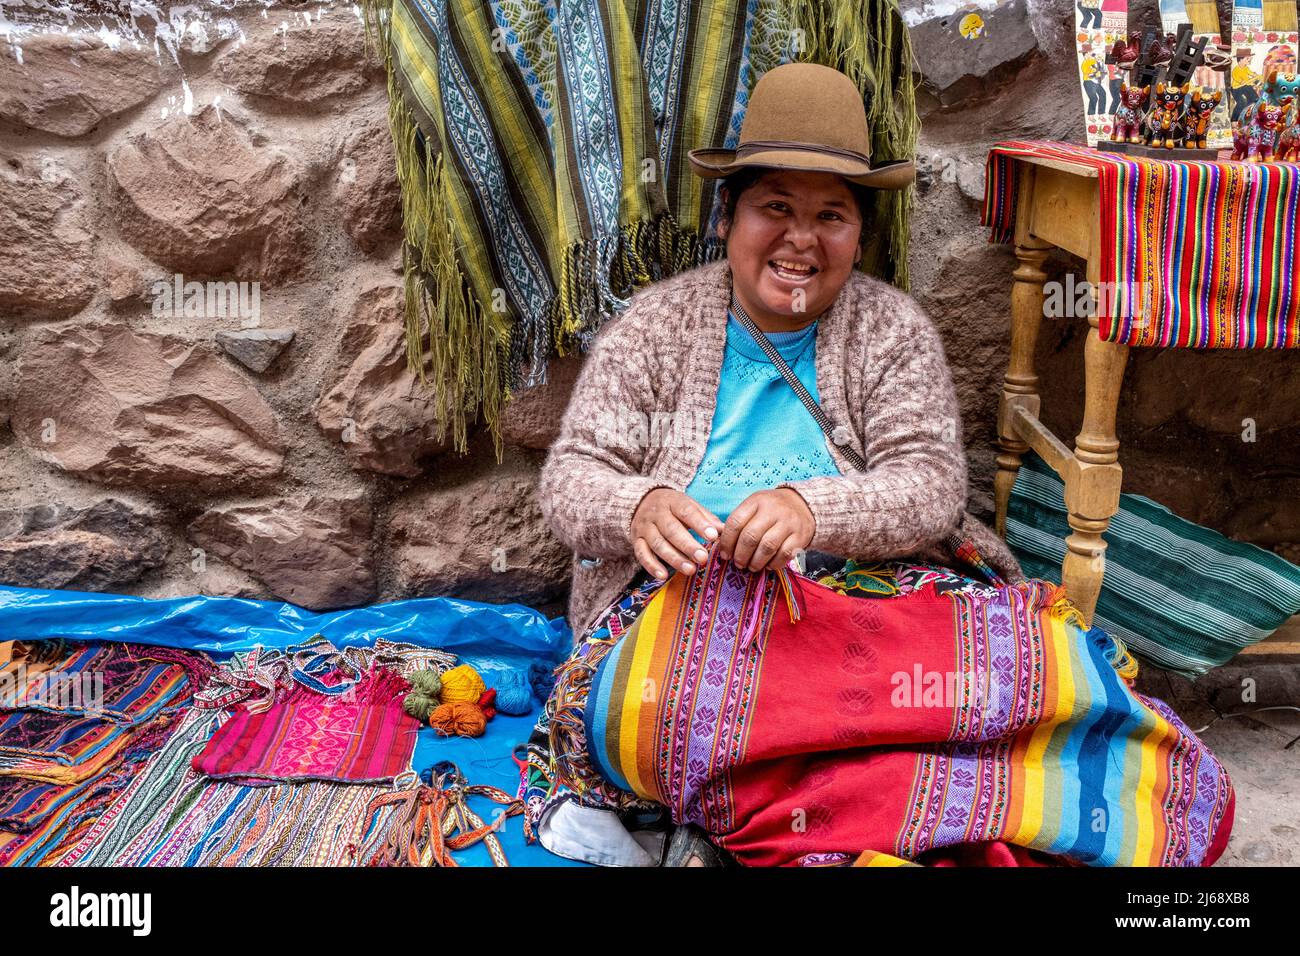 An Indigenous Woman Displays Her Hand Made Souvenirs/Crafts At The Sunday Market In The Town Of Pisac, The Sacred Valley, Calca Province, Peru. Stock Photo